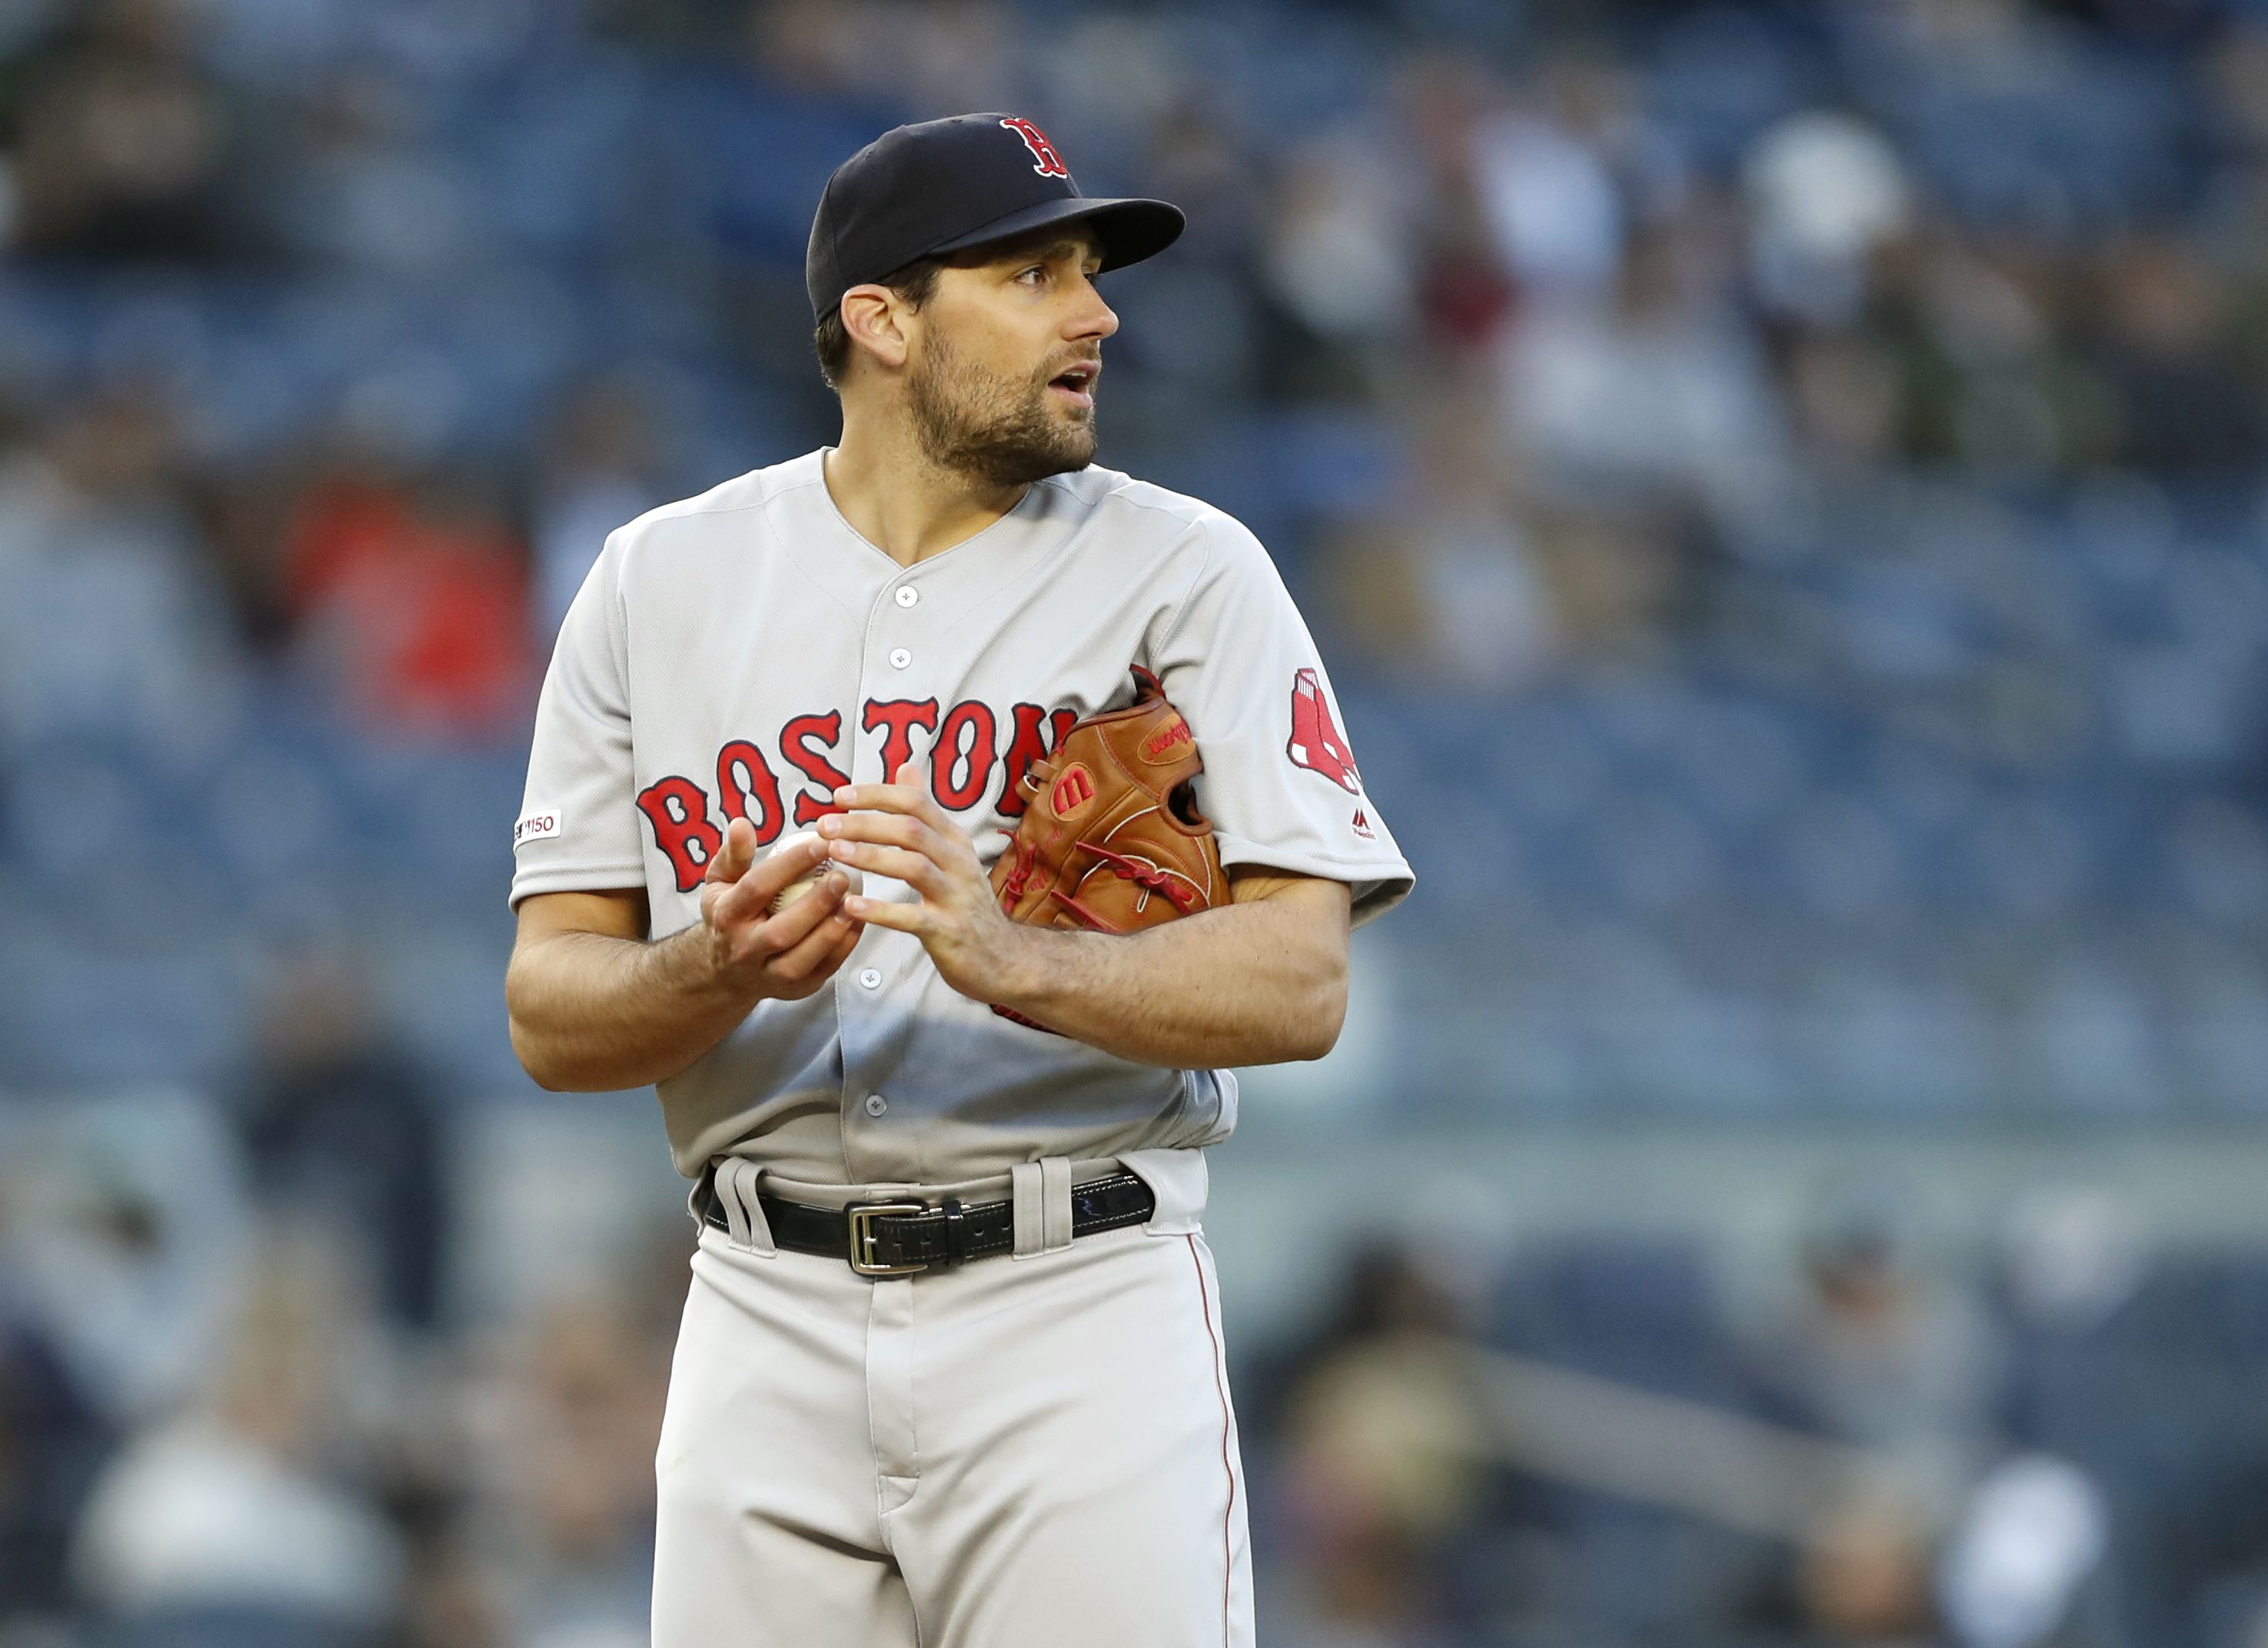 Boston Red Sox's Nathan Eovaldi still in line to pitch Game 6 of ALCS after  24-pitch relief appearance in Game 4 